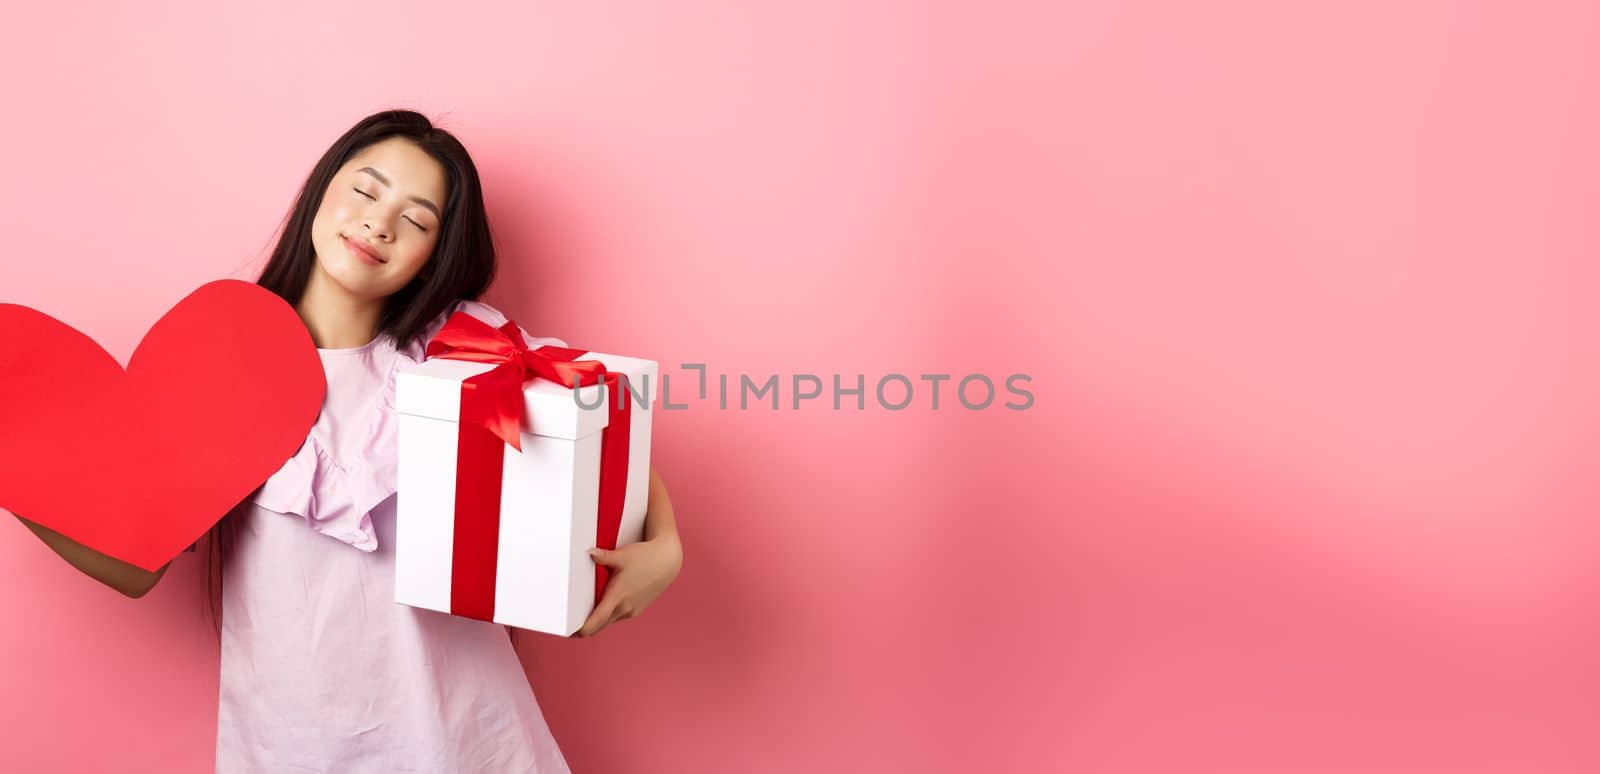 Valentines day concept. Romantic and tender asian teen girl smiling, close eyes and standing dreamy with lover gifts, holding present and big red heart cutout, pink background.